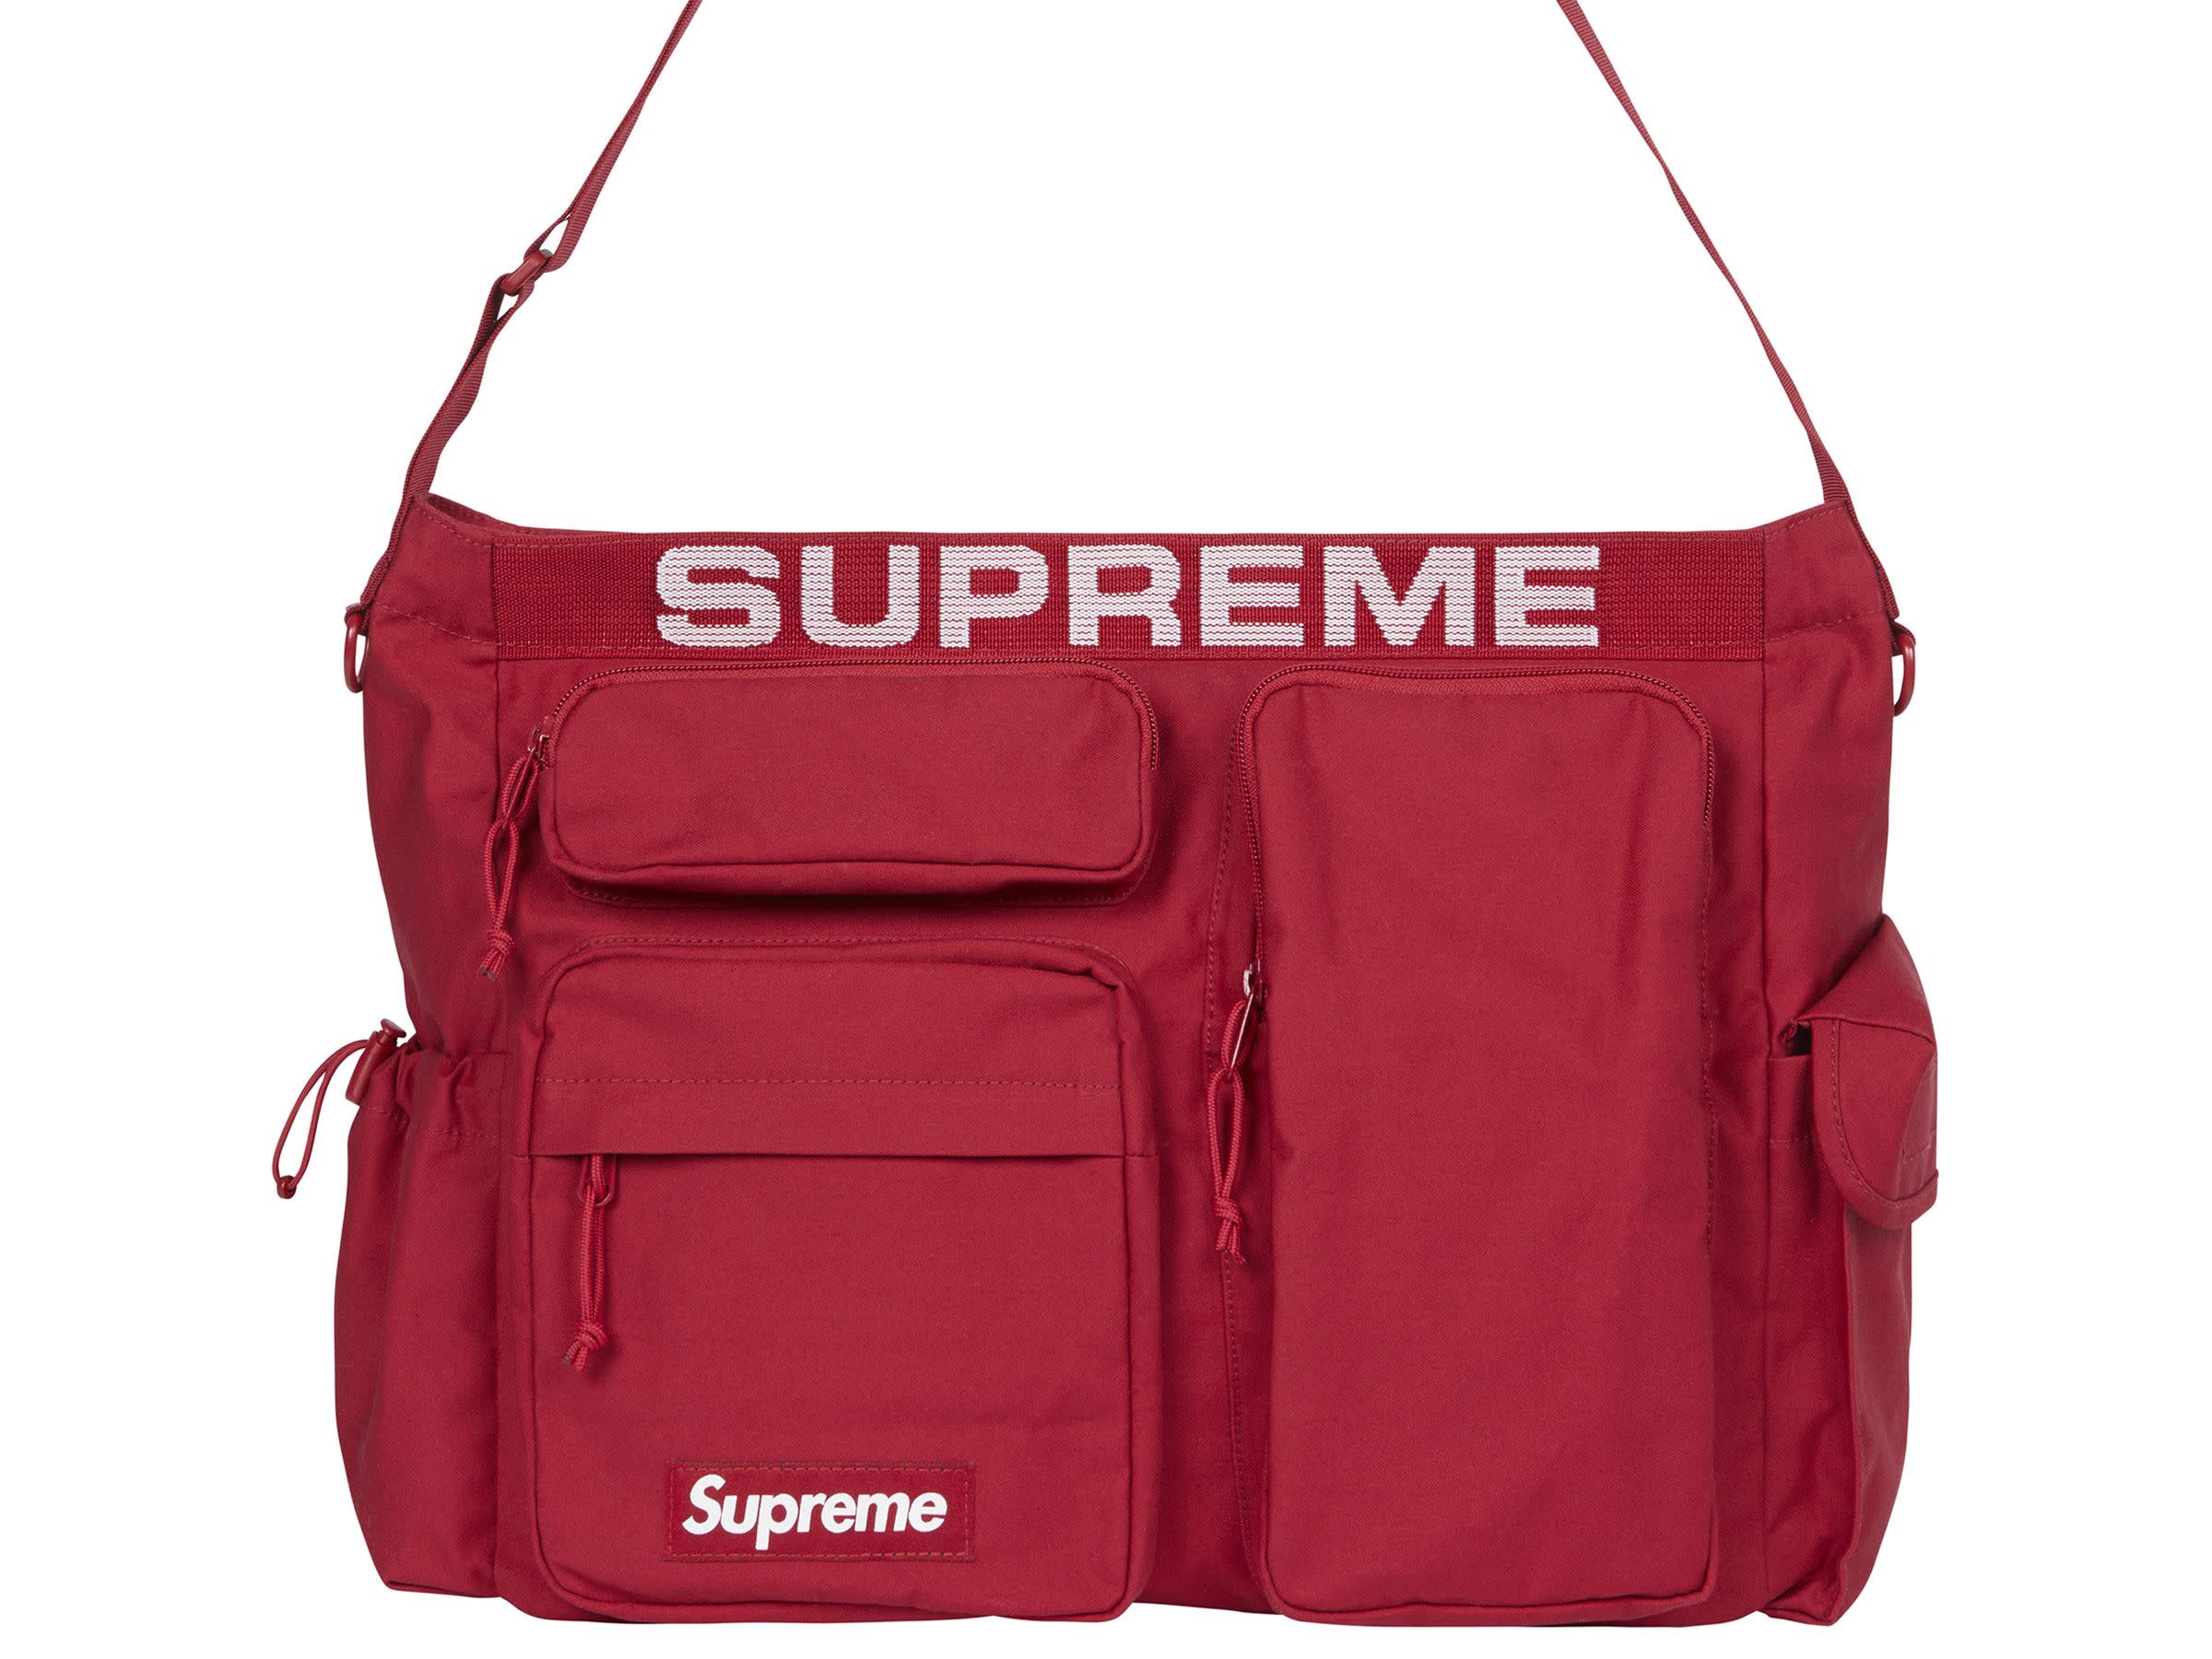 Supreme Field Backpack 37L Red 赤 バッグ リュック/バックパック